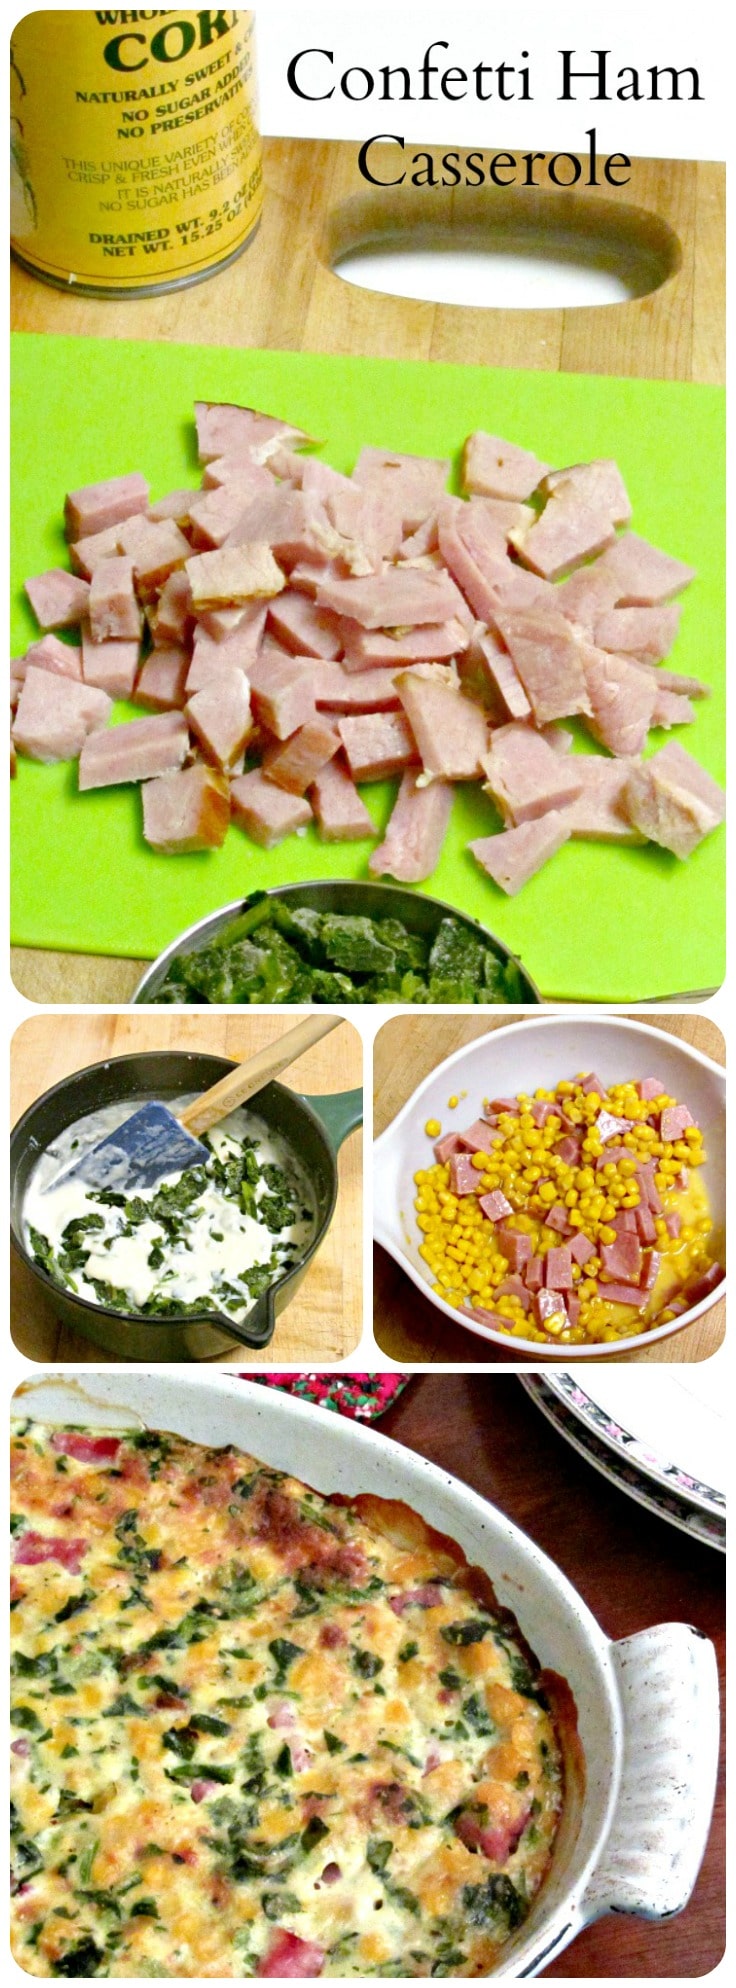 Use leftover ham to make a casserole with corn and spinach. Colorful, plenty of flavor, and a bit of a change. 